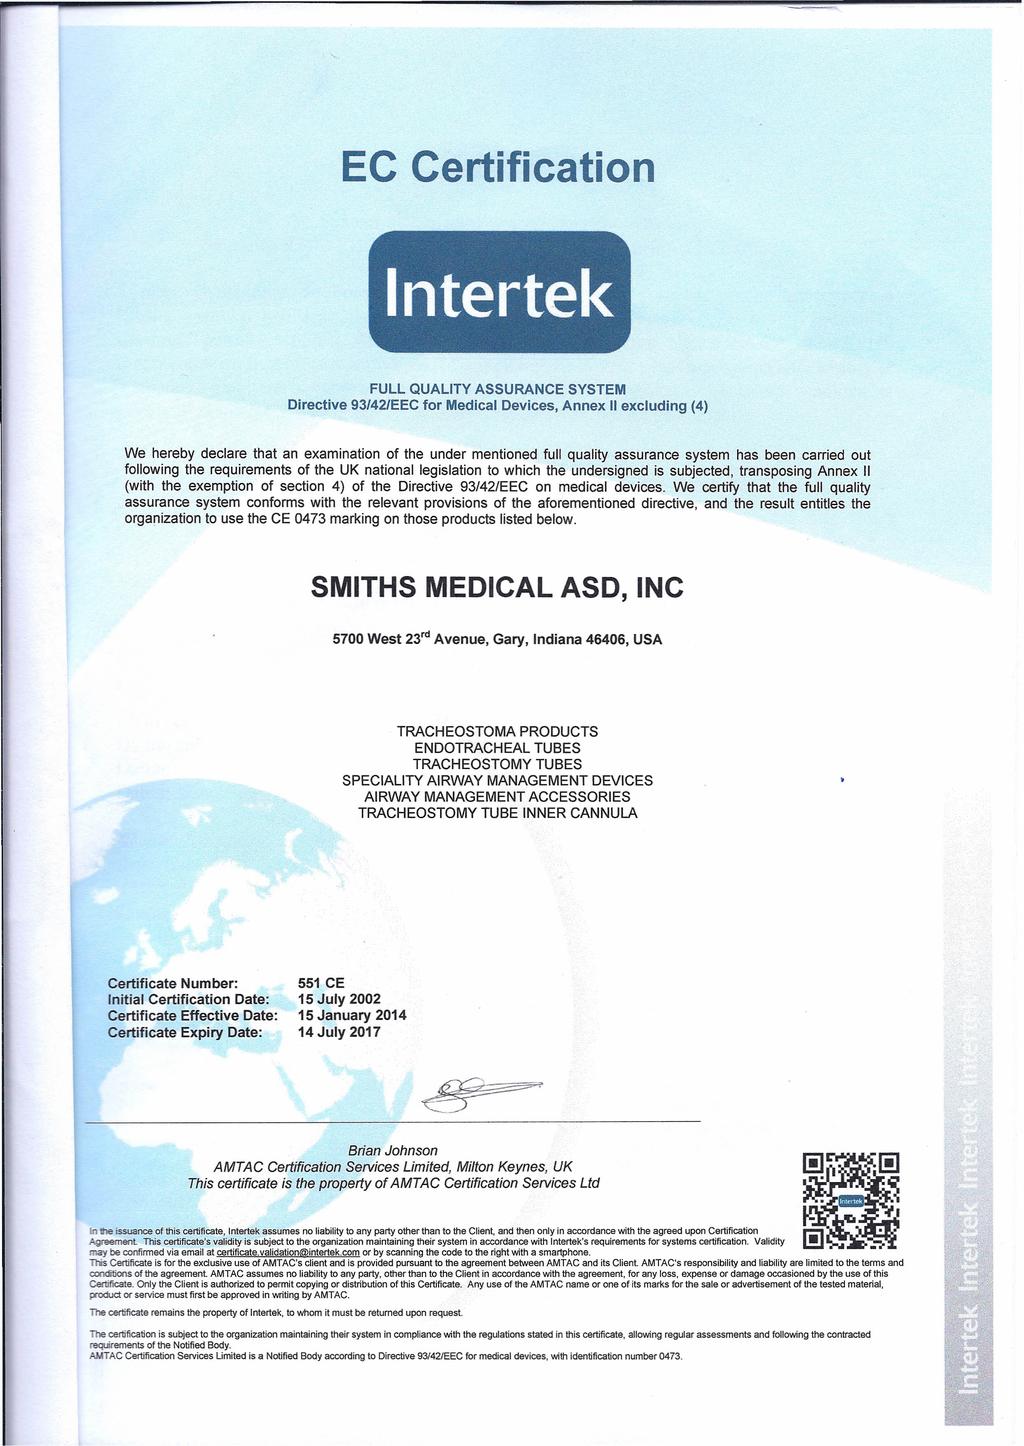 EC Certification Intertek FULL QUALITY ASSURANCE SYSTEM Directive 93/42/EEC for Medical Devices, Annex II excluding (4) We hereby declare that an examination of the under mentioned full quality